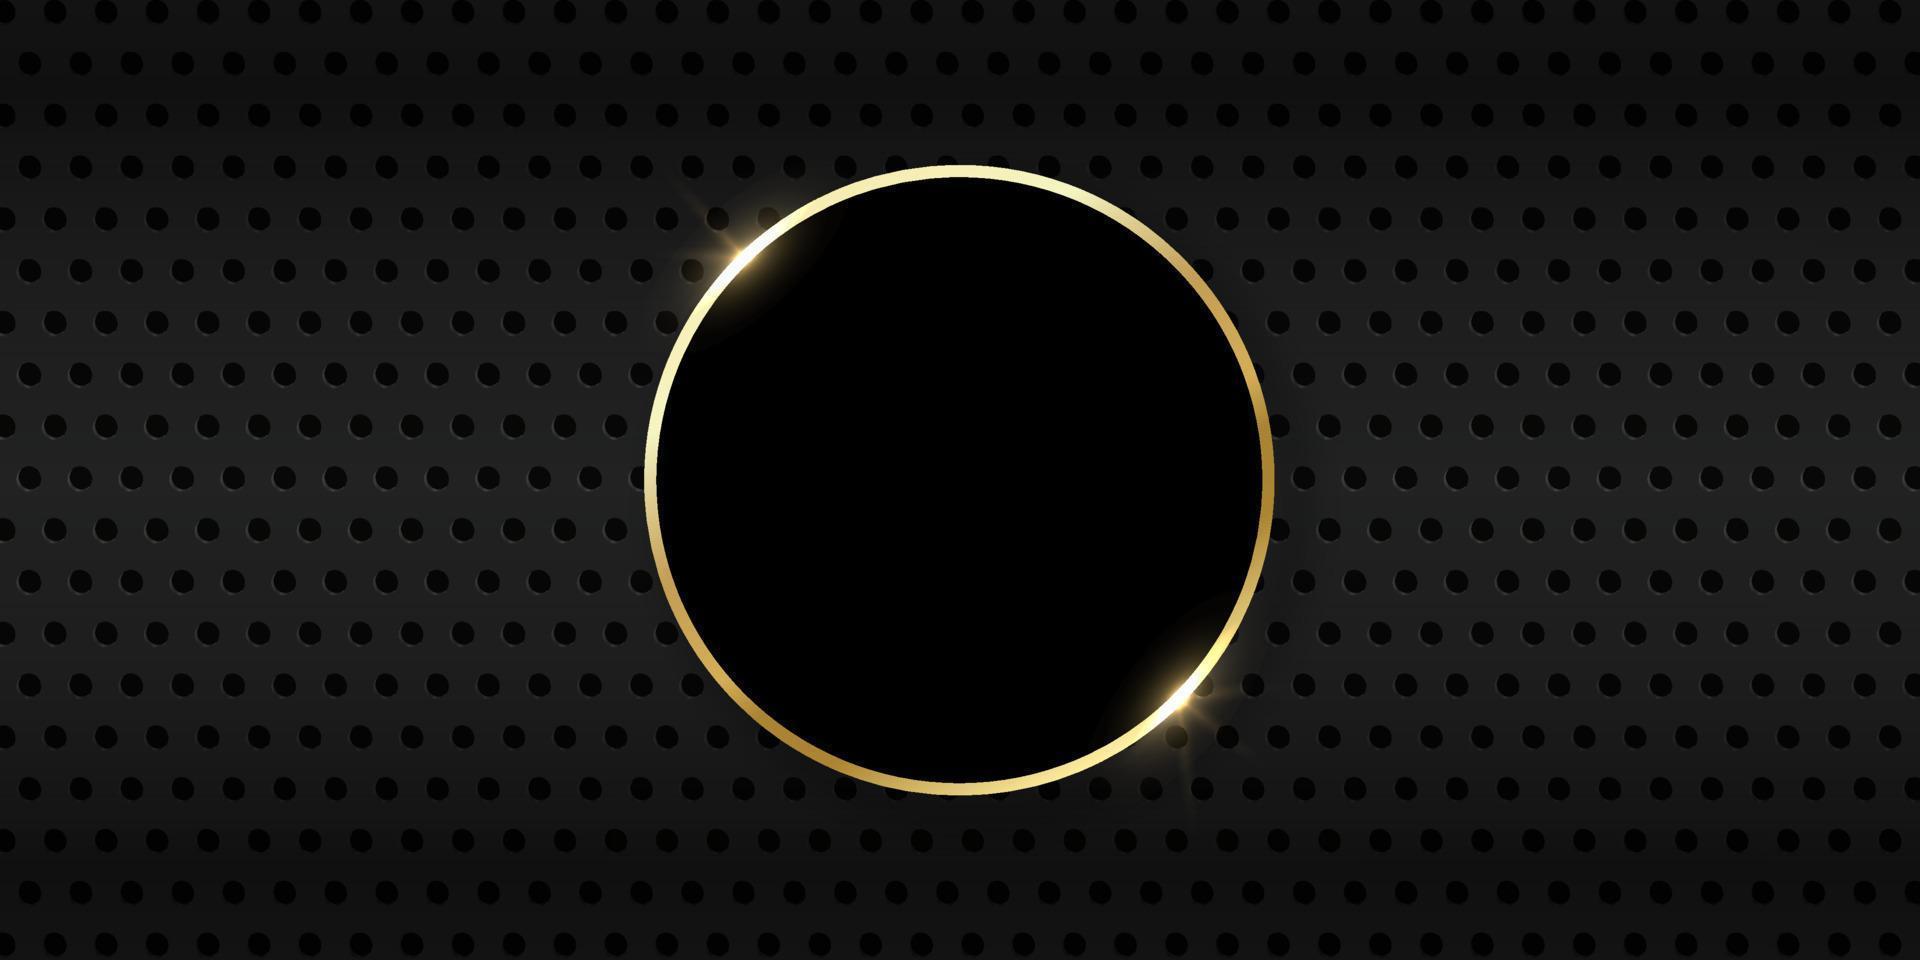 Metal Black Background Perforated by Dots with Gold Ring. Golden Shiny Circle on Dark Metal Meshed Background. Glow Round on Steel Backdrop. Abstract Modern Design. Vector Illustration.